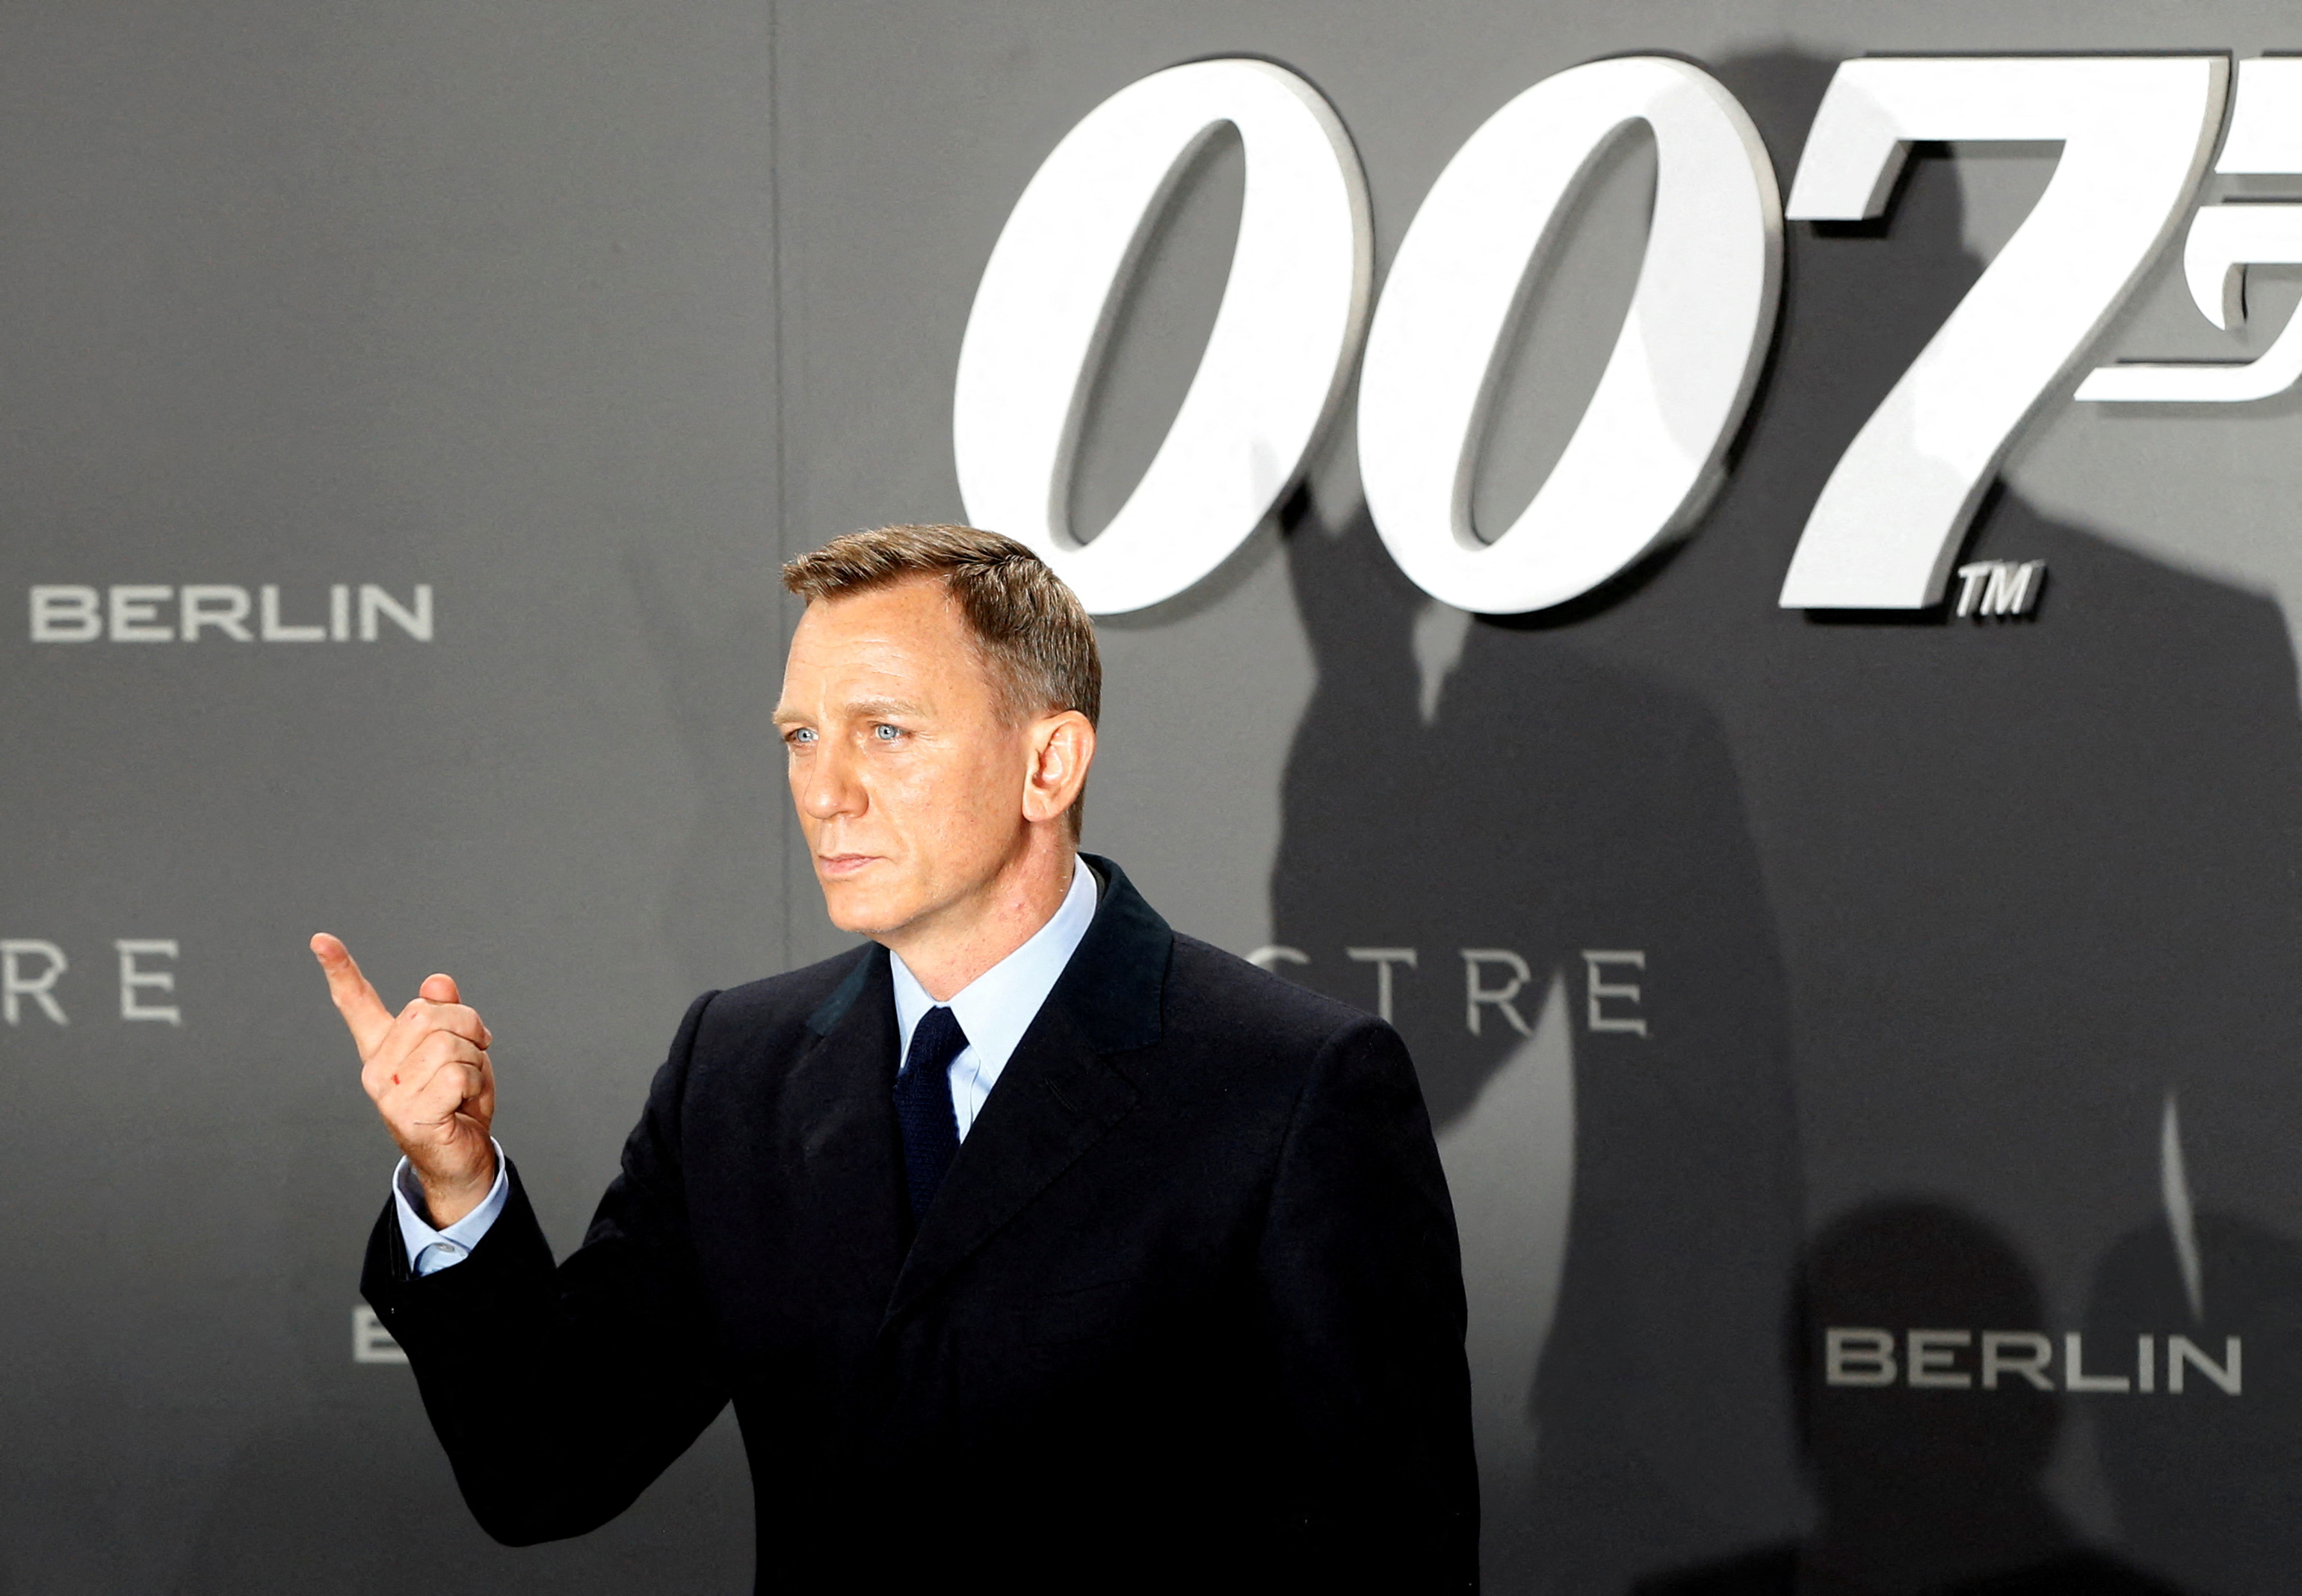 Actor Daniel Craig poses on the red carpet at the German premiere of the James Bond 007 film "Spectre" in Berlin, Germany